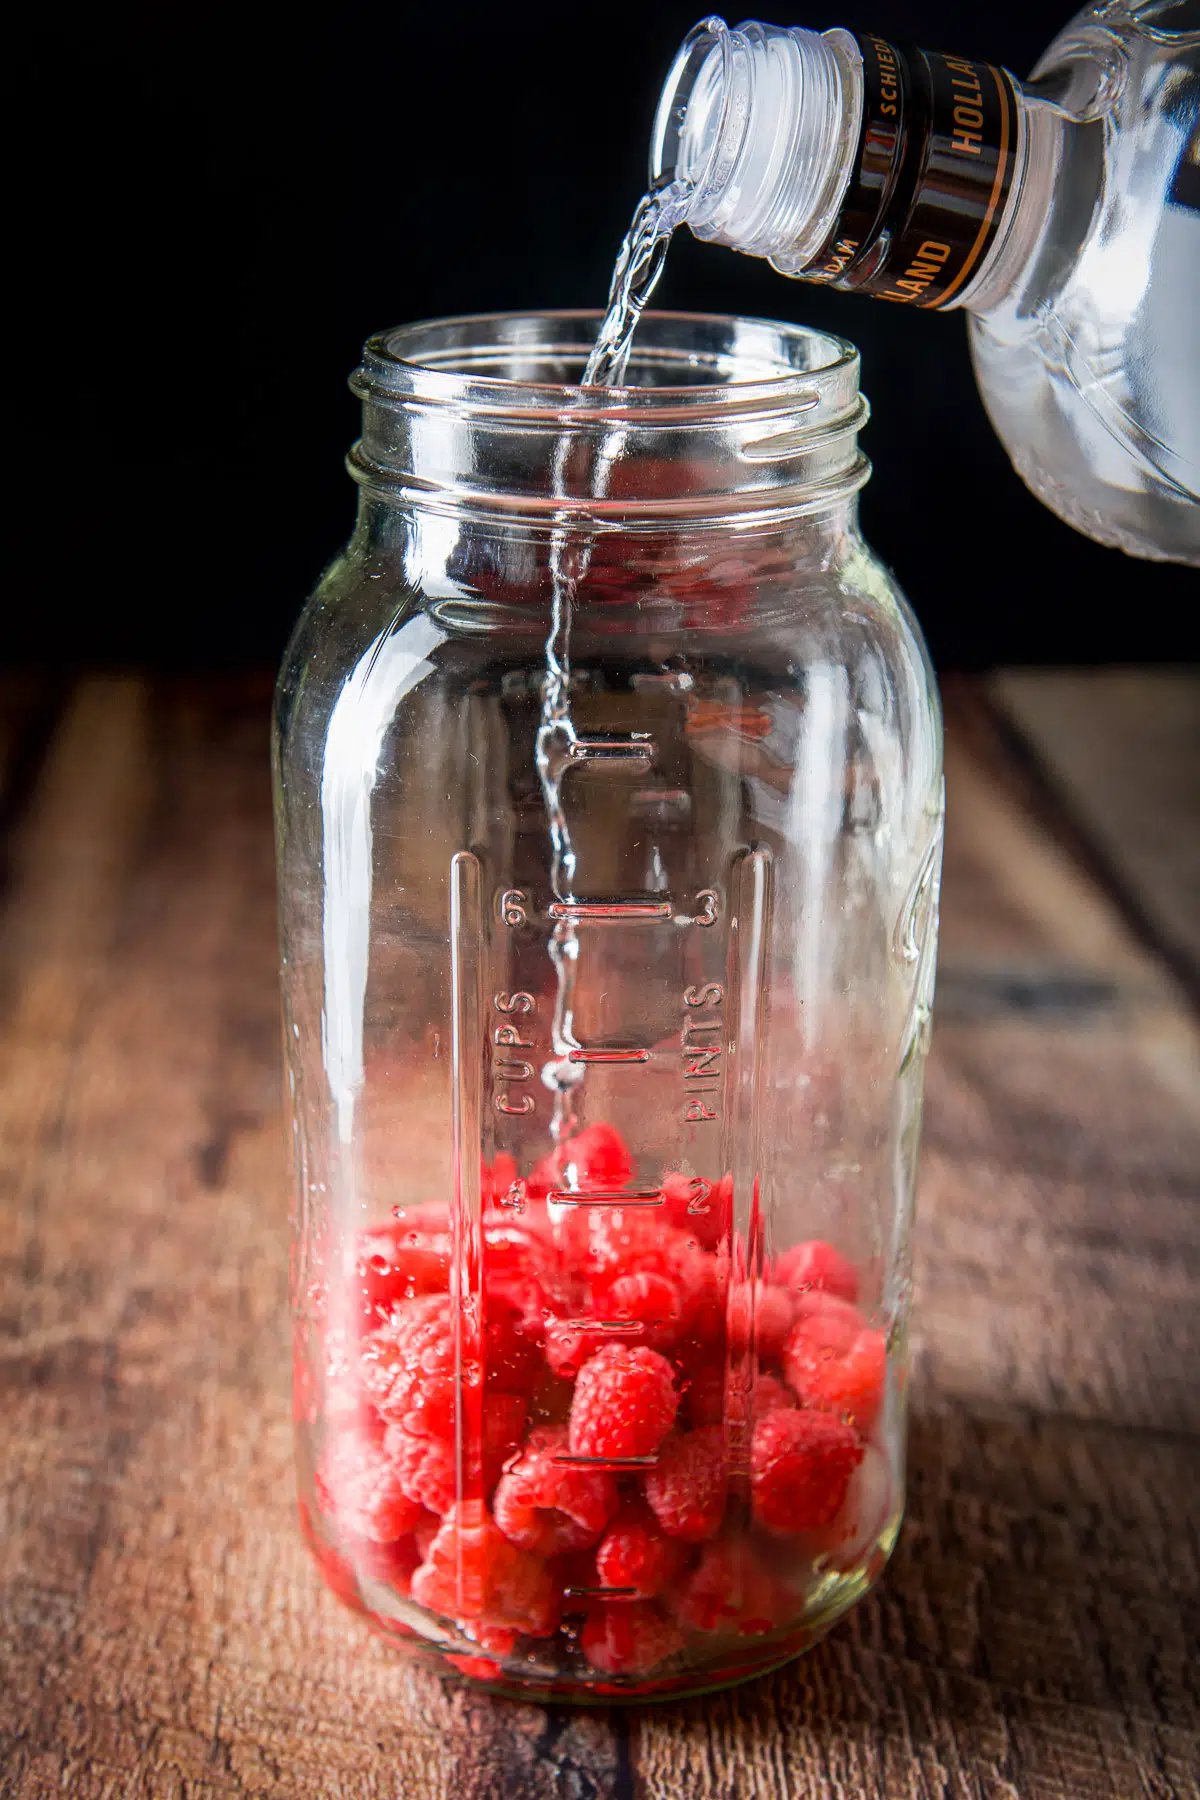 Vodka being poured into the jar over the raspberries